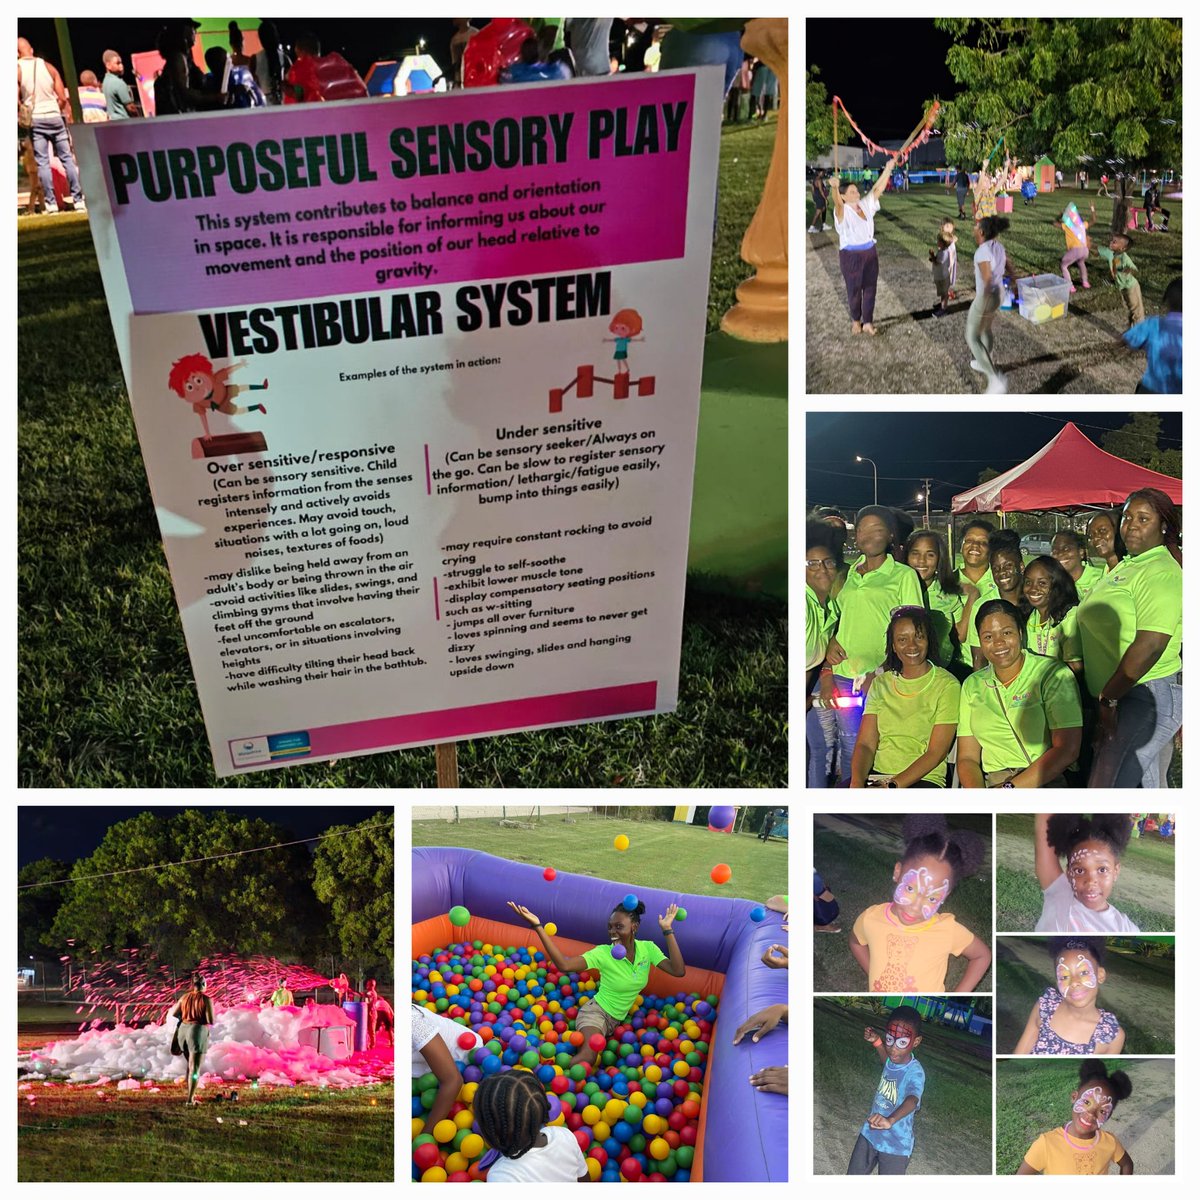 As Autism Awareness & Acceptance Month comes to a close, here are some of the highlights from this weekend's Sensory Fair, held in collaboration with CHATS.

#autismawareness 
#autismacceptance 
#autismawarenessmonth 
#sensoryplay 
#sensoryprocessingdisorder